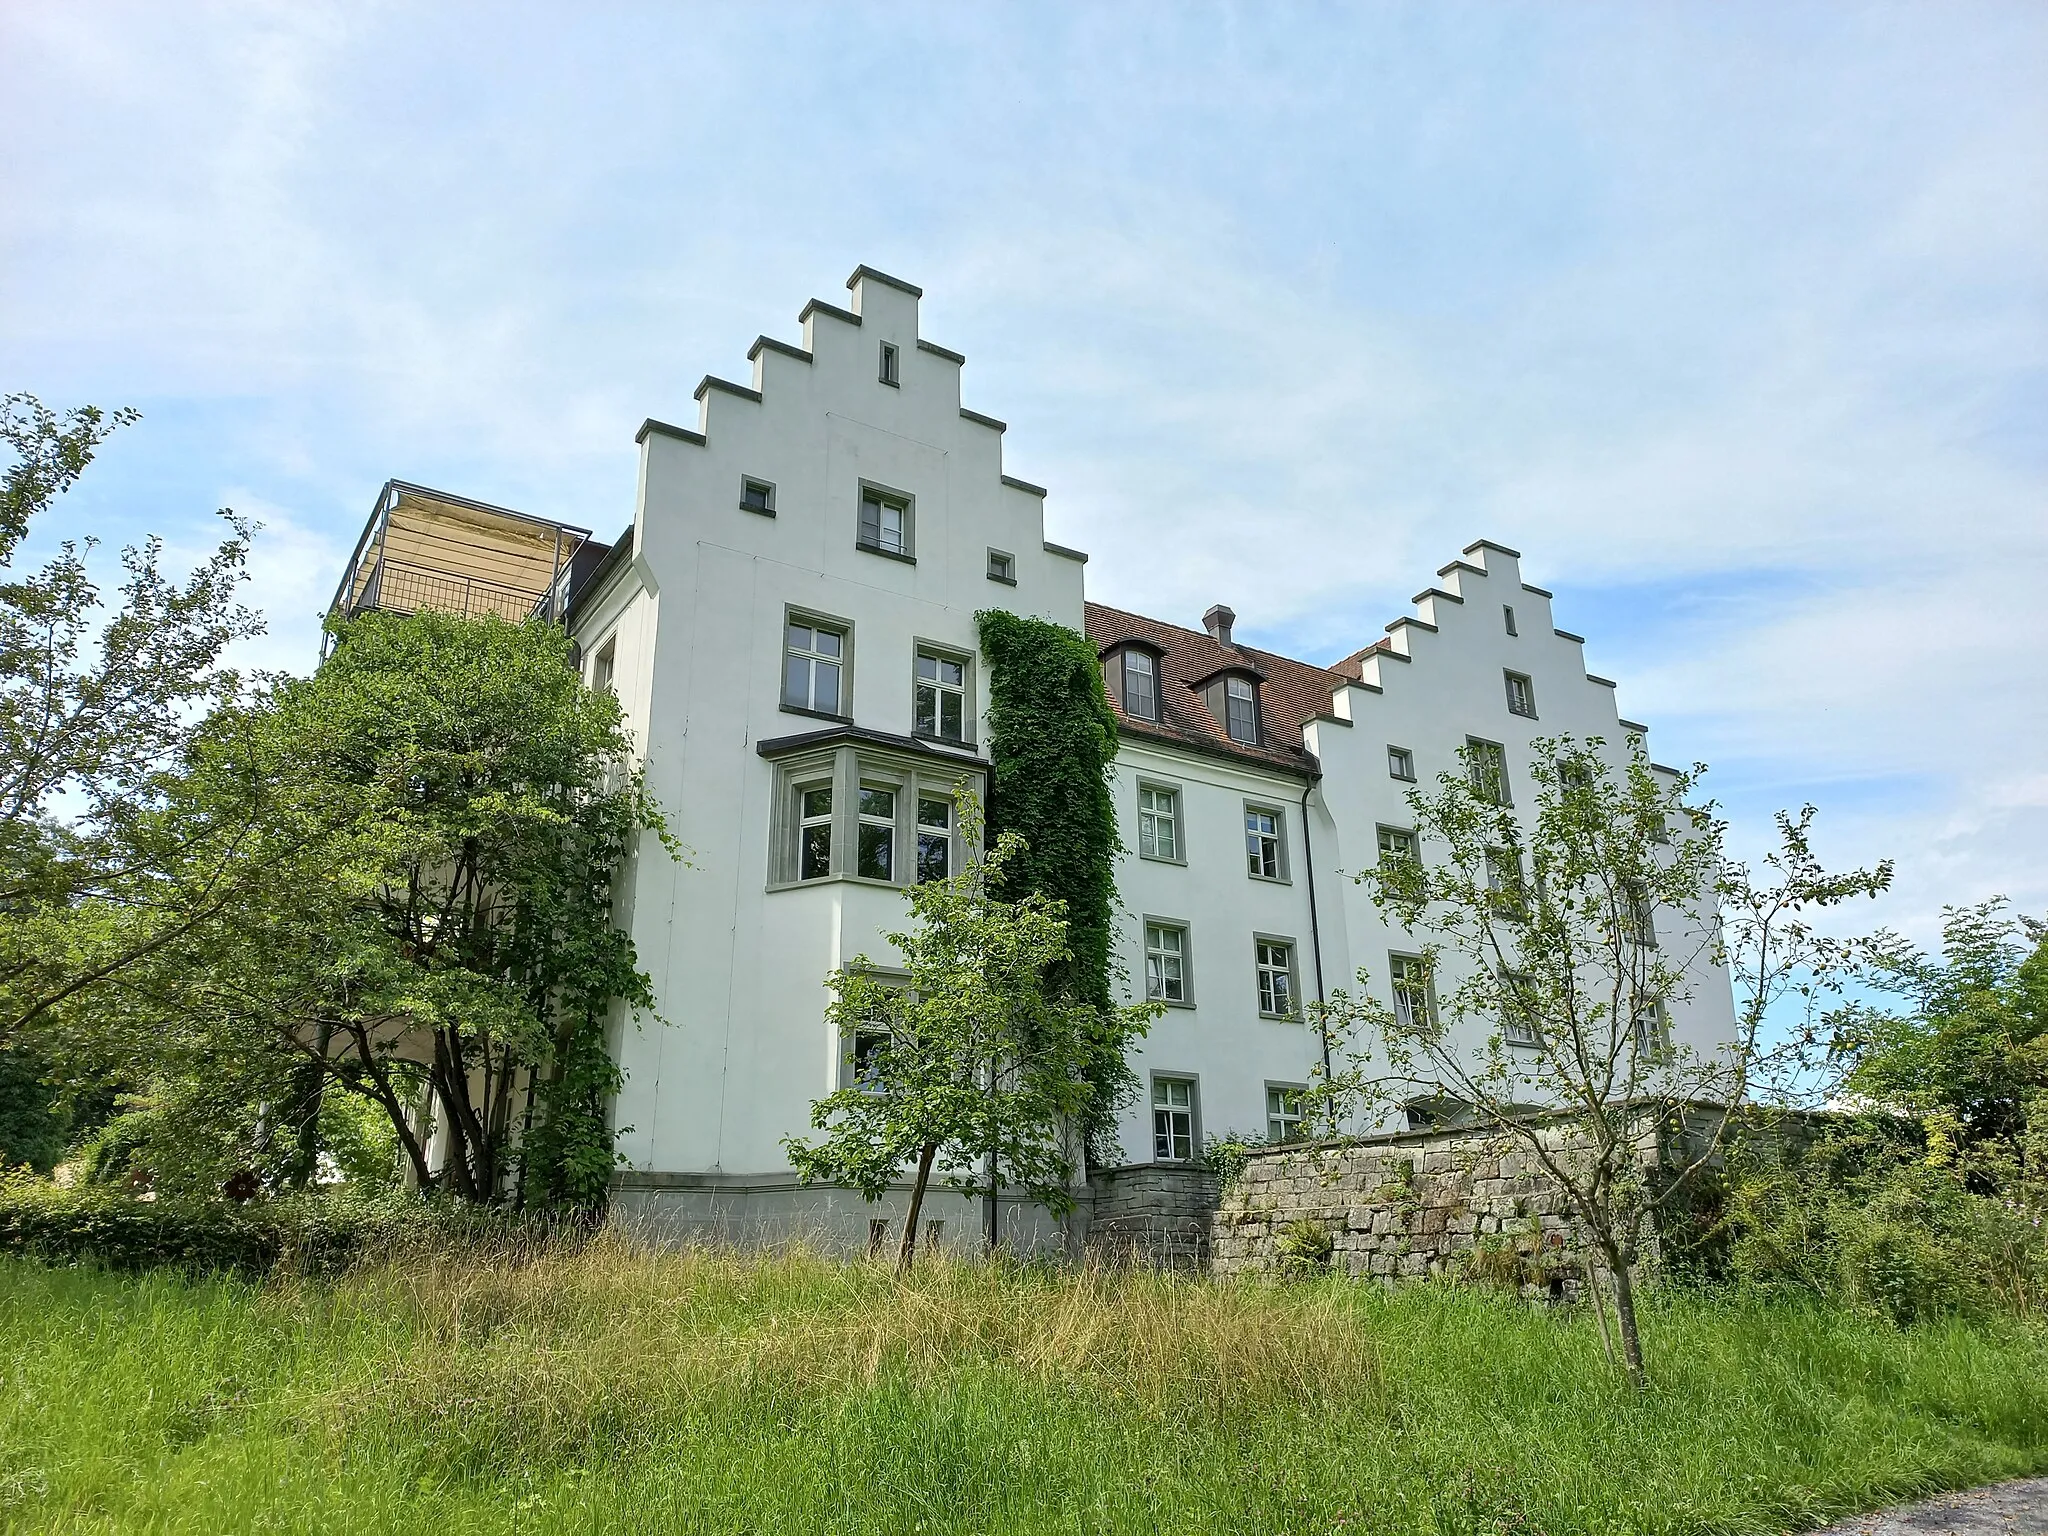 Photo showing: Castle Wartegg is a 16th century castle at the Rorschacherberg in the Swiss Canton of St. Gallen. Today there is a hotel and restaurant.